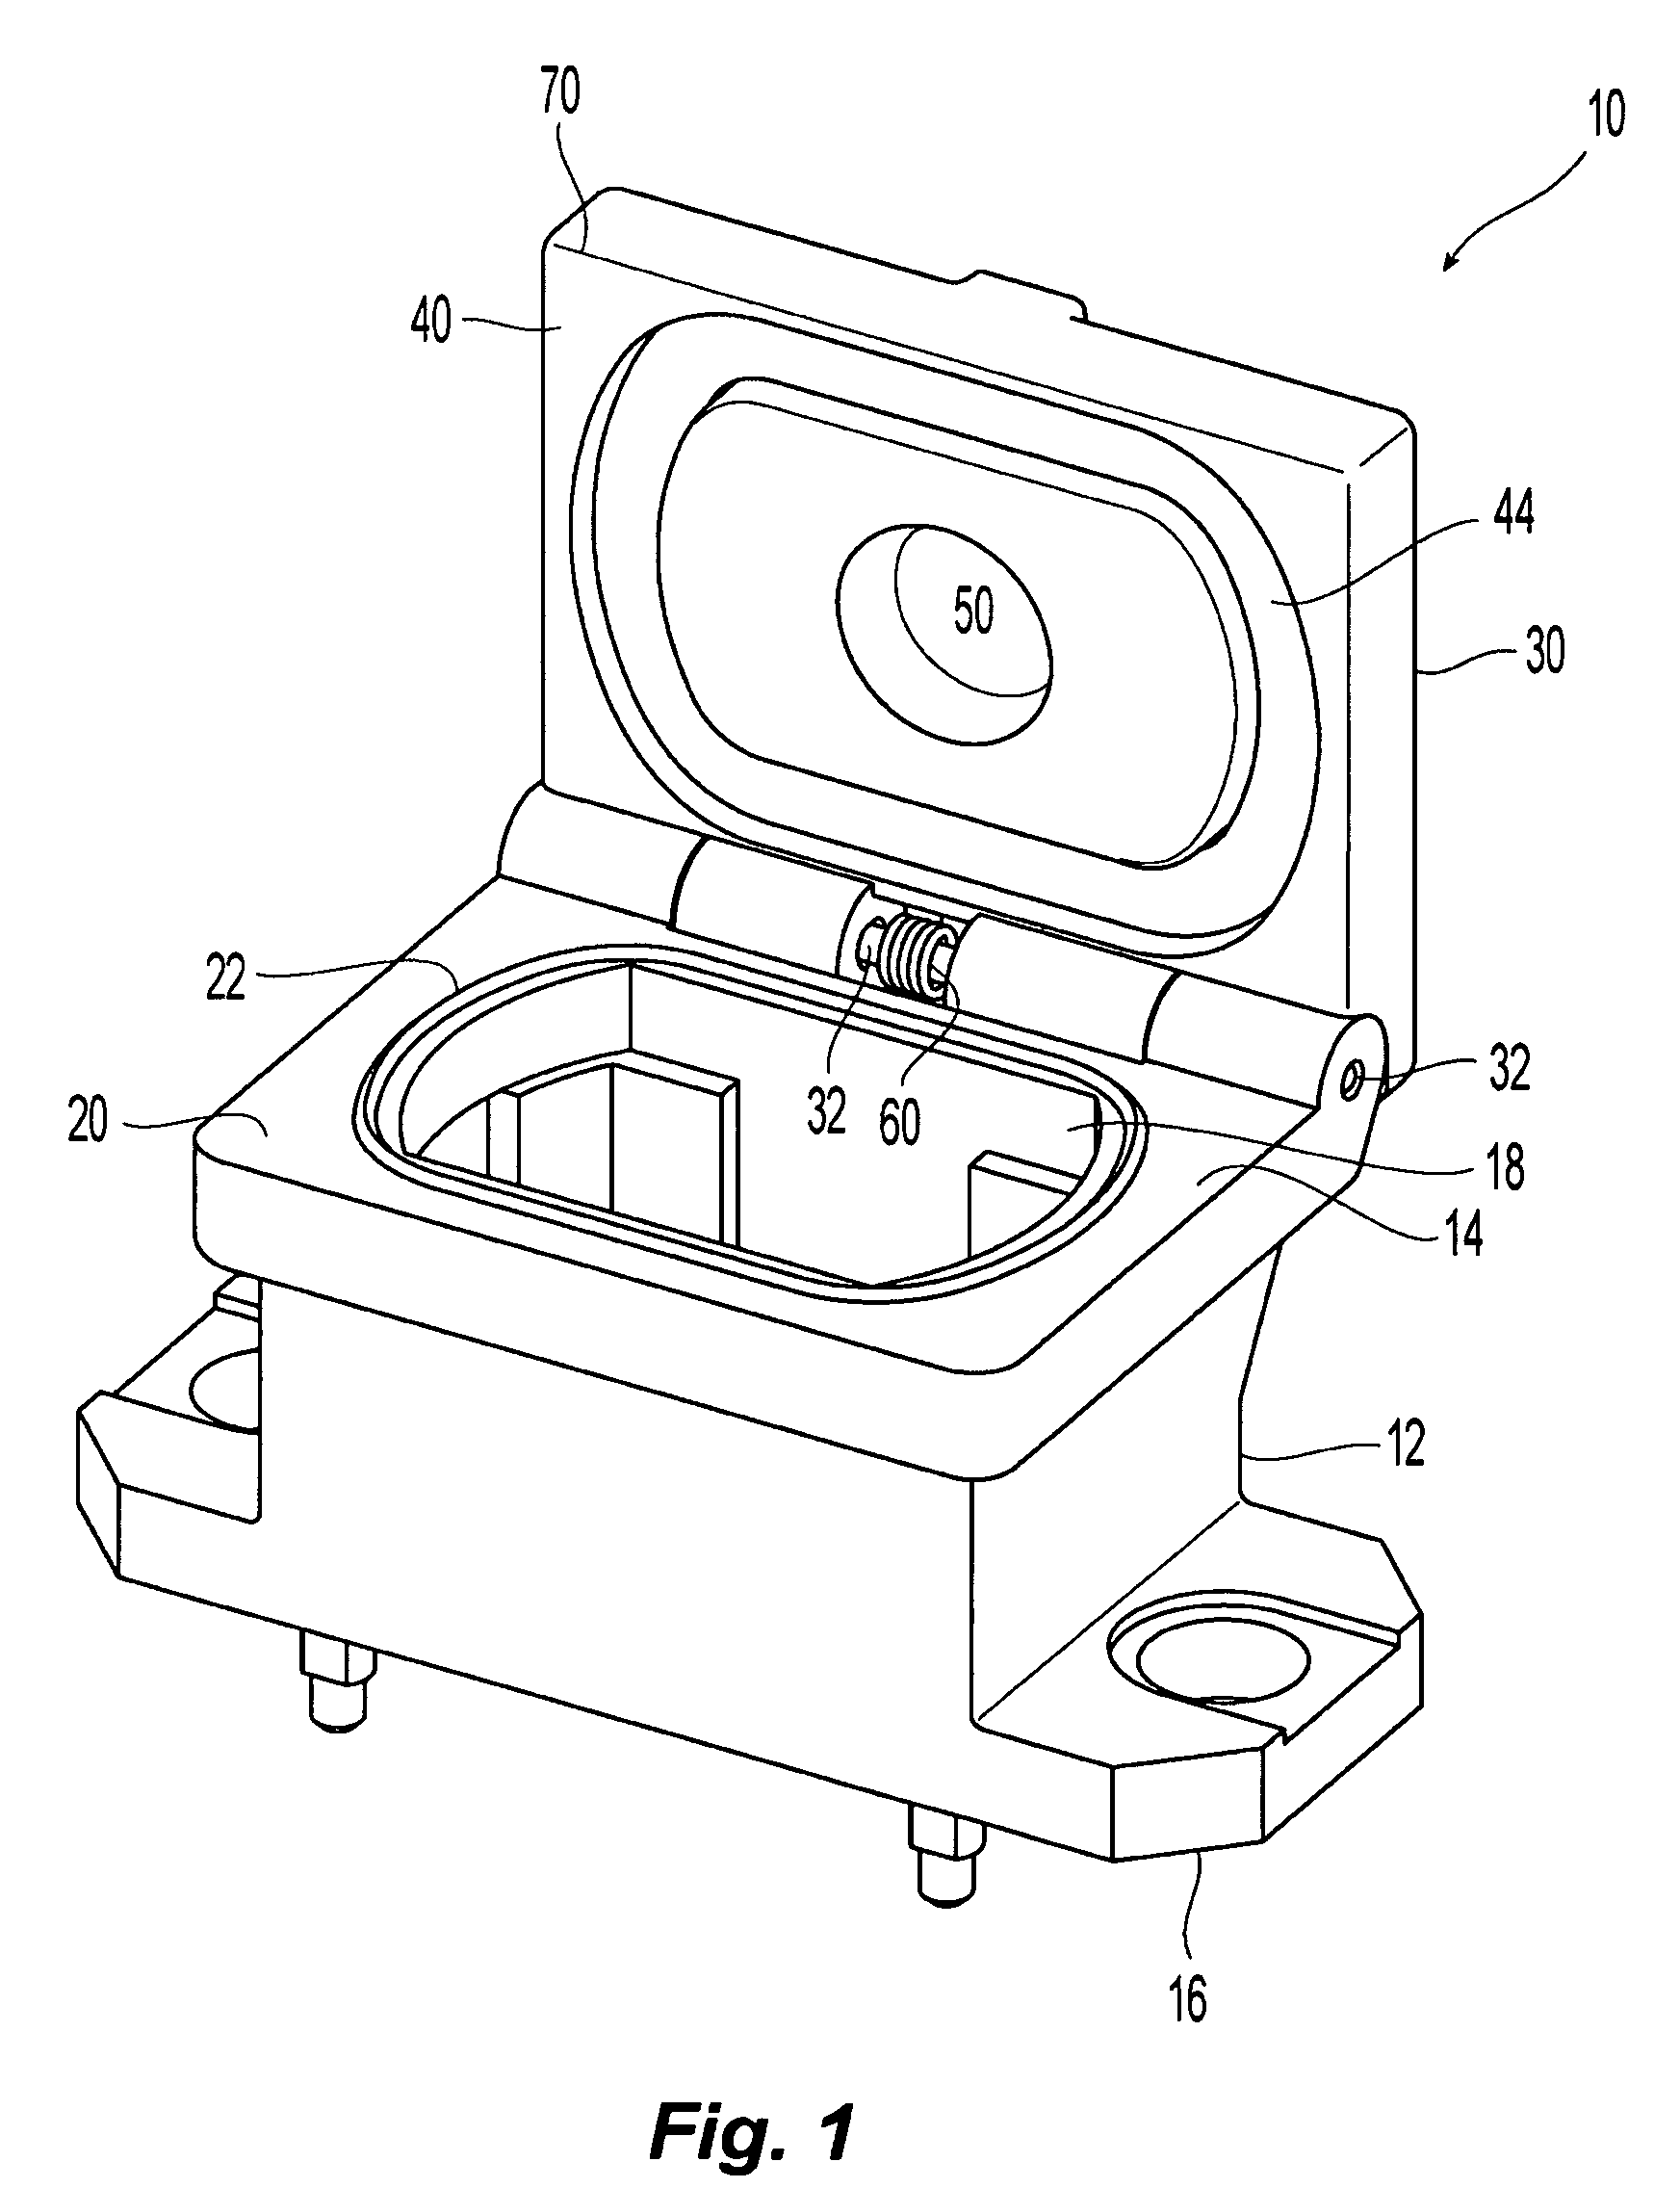 Adapter with dust shutter